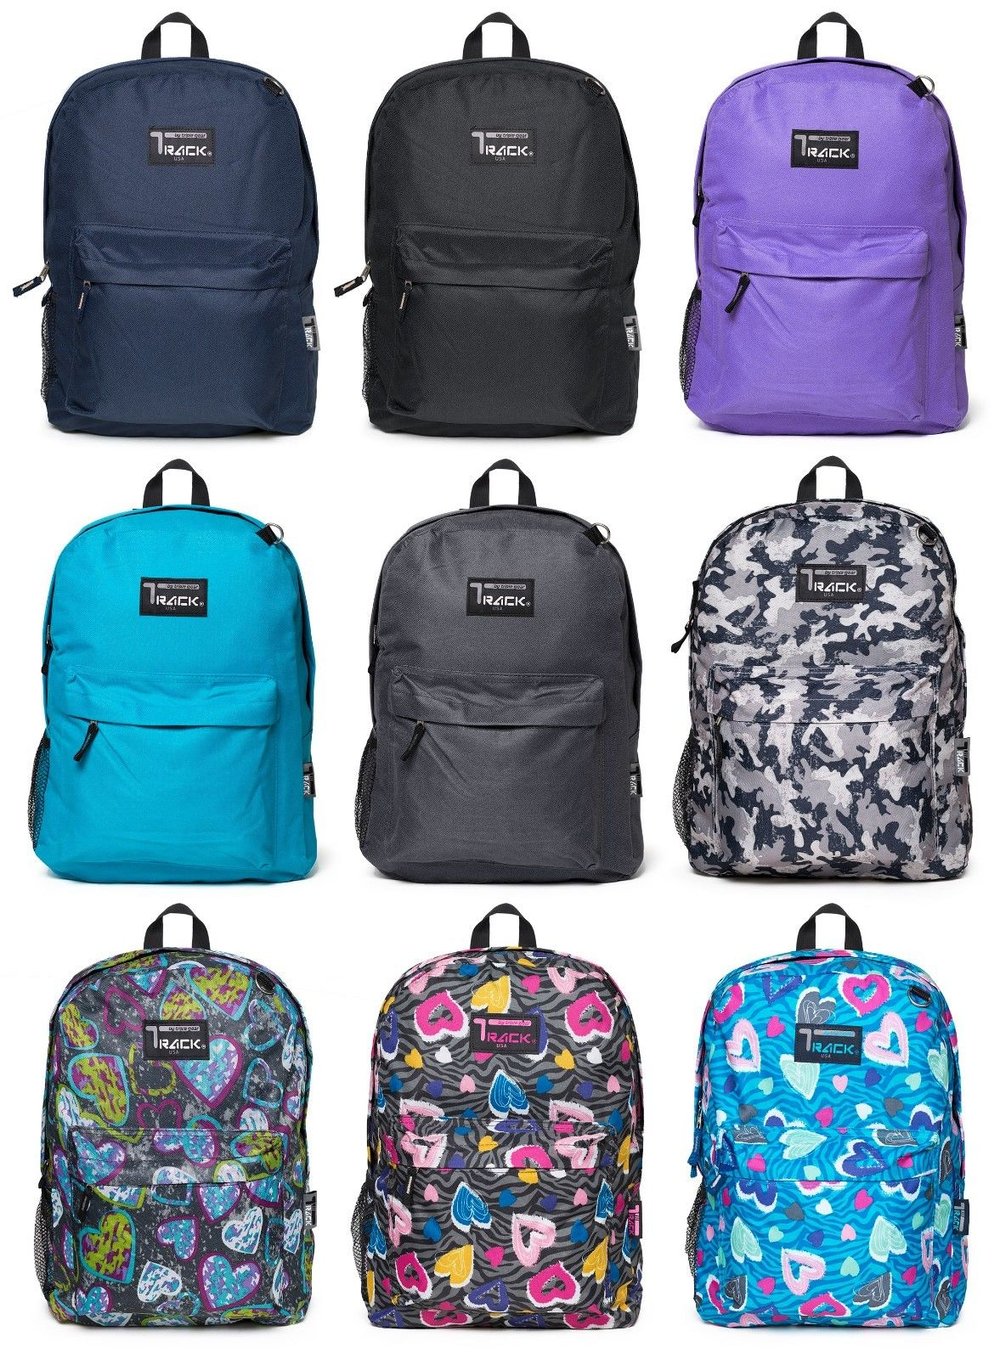 Track Basic Student Outdoor Travel Back Pack